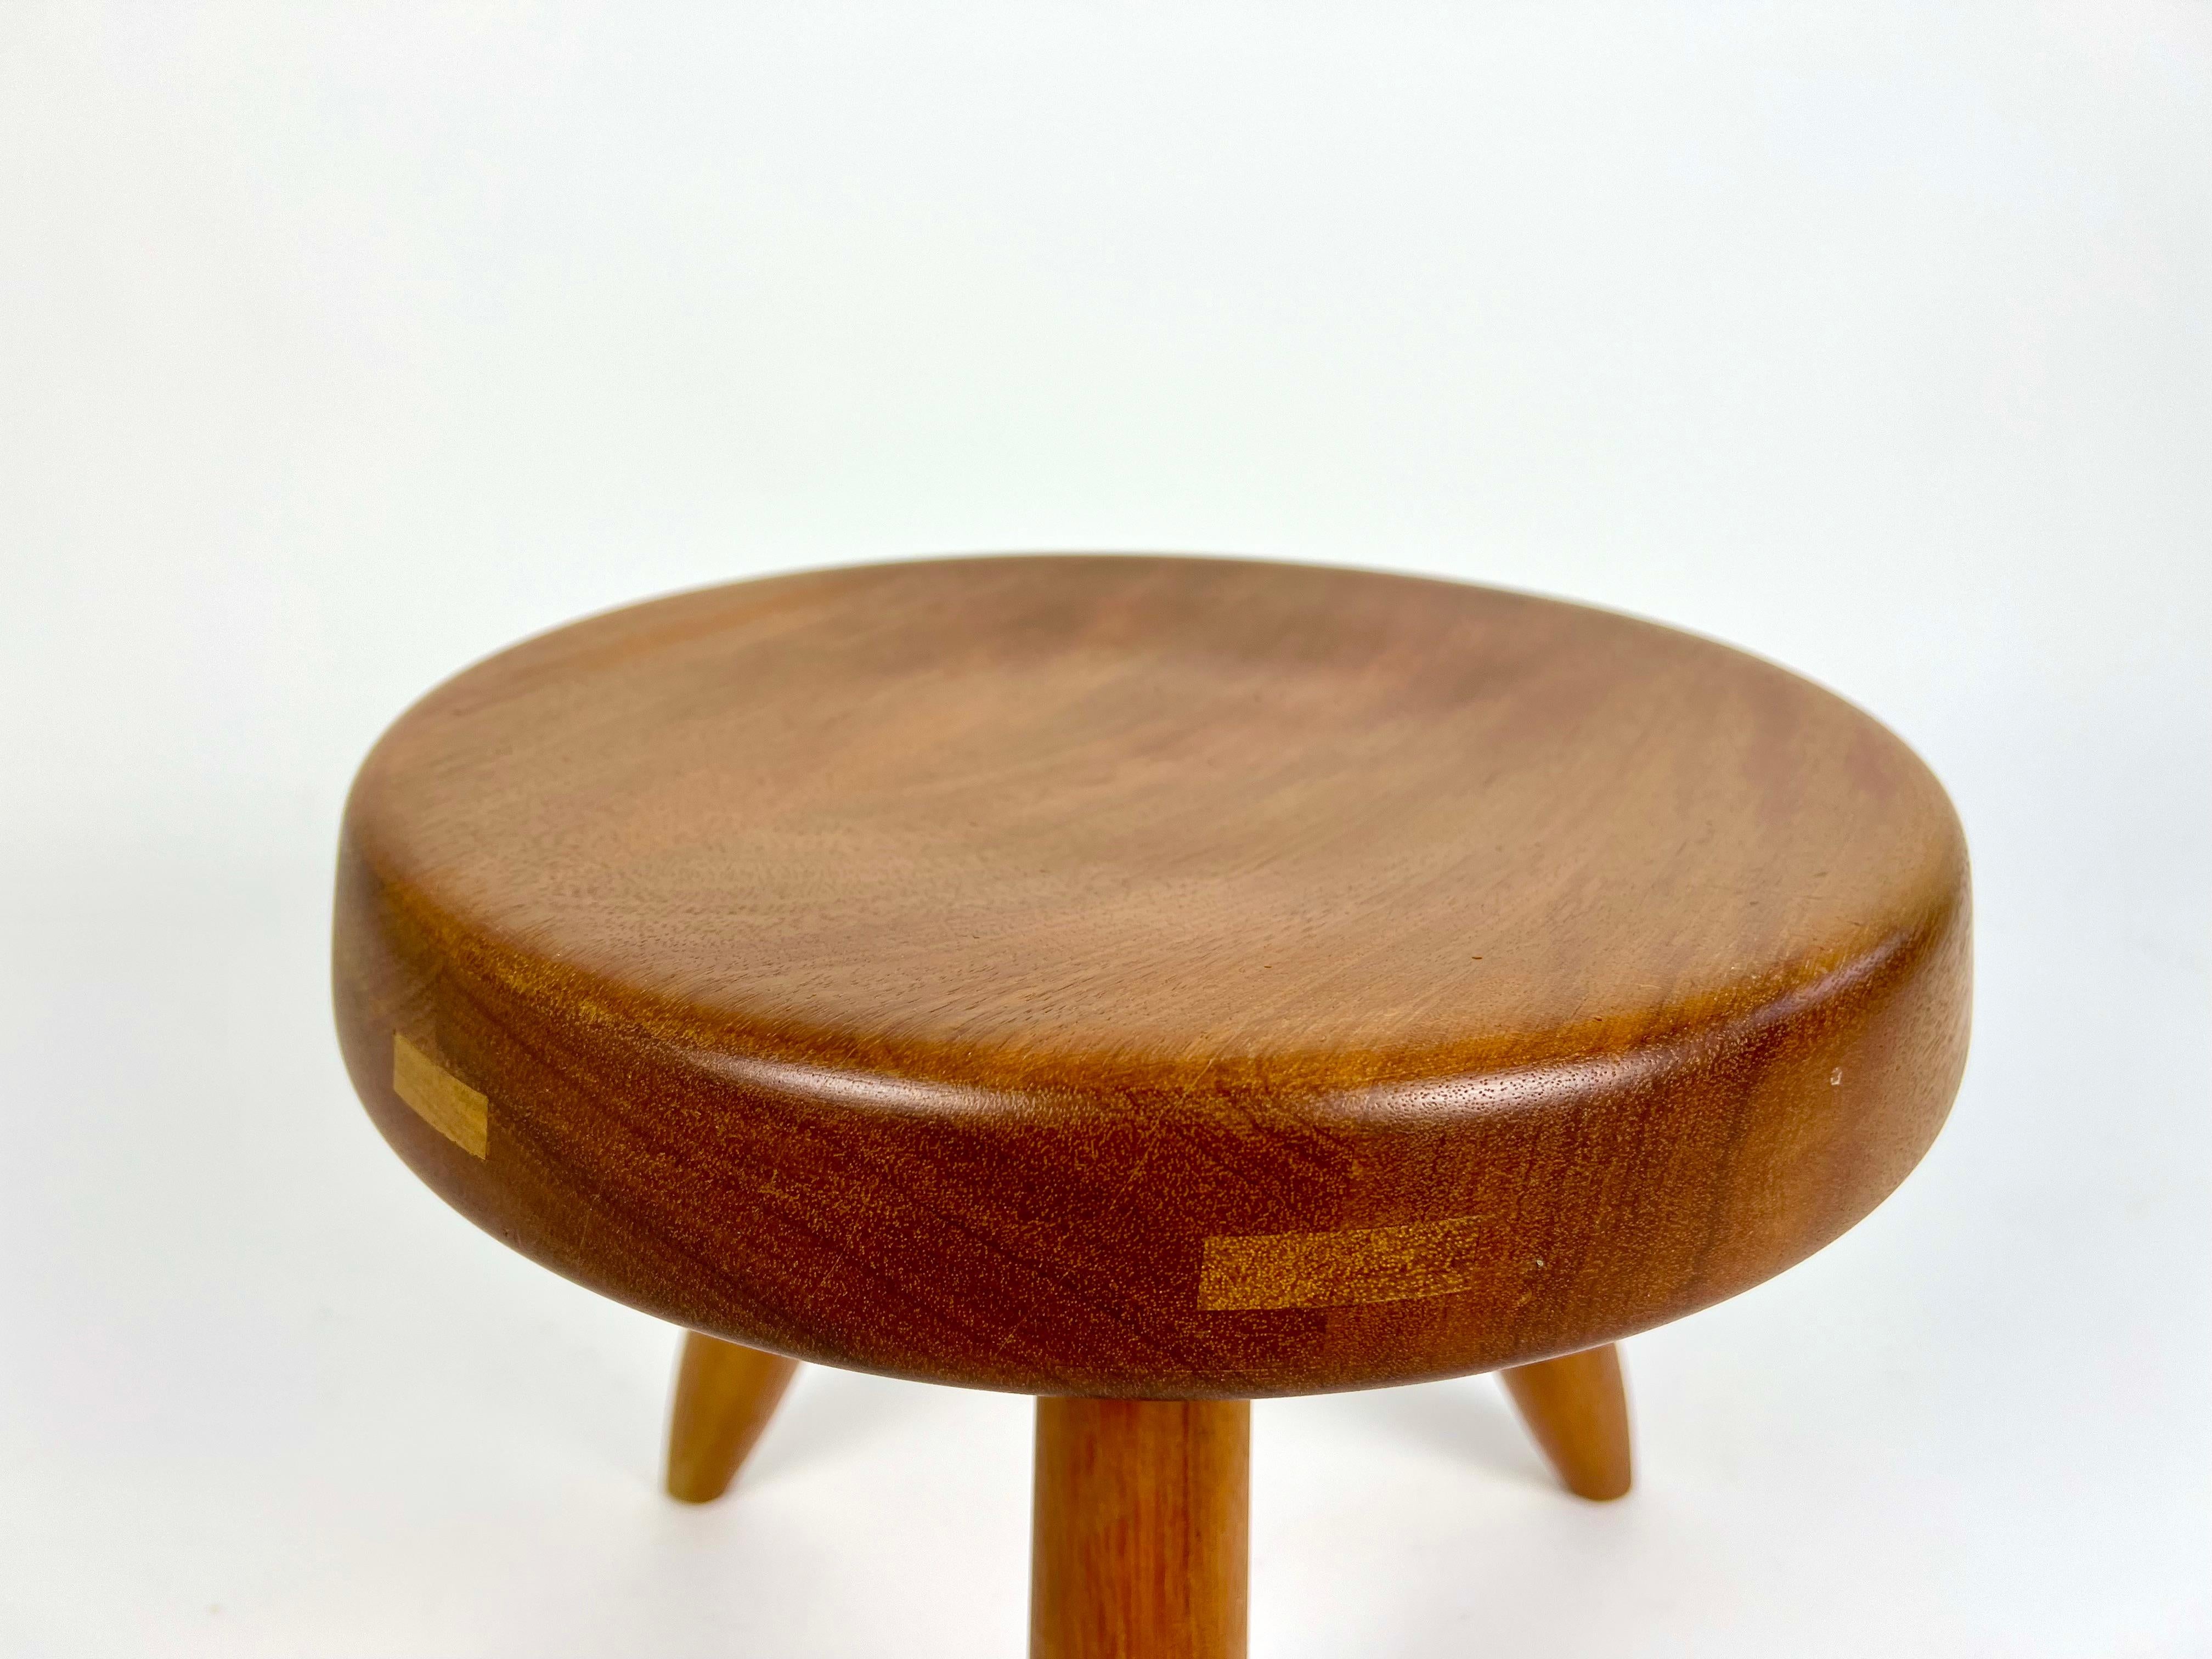 Berger low stool in mahogany, Charlotte Perriand 4